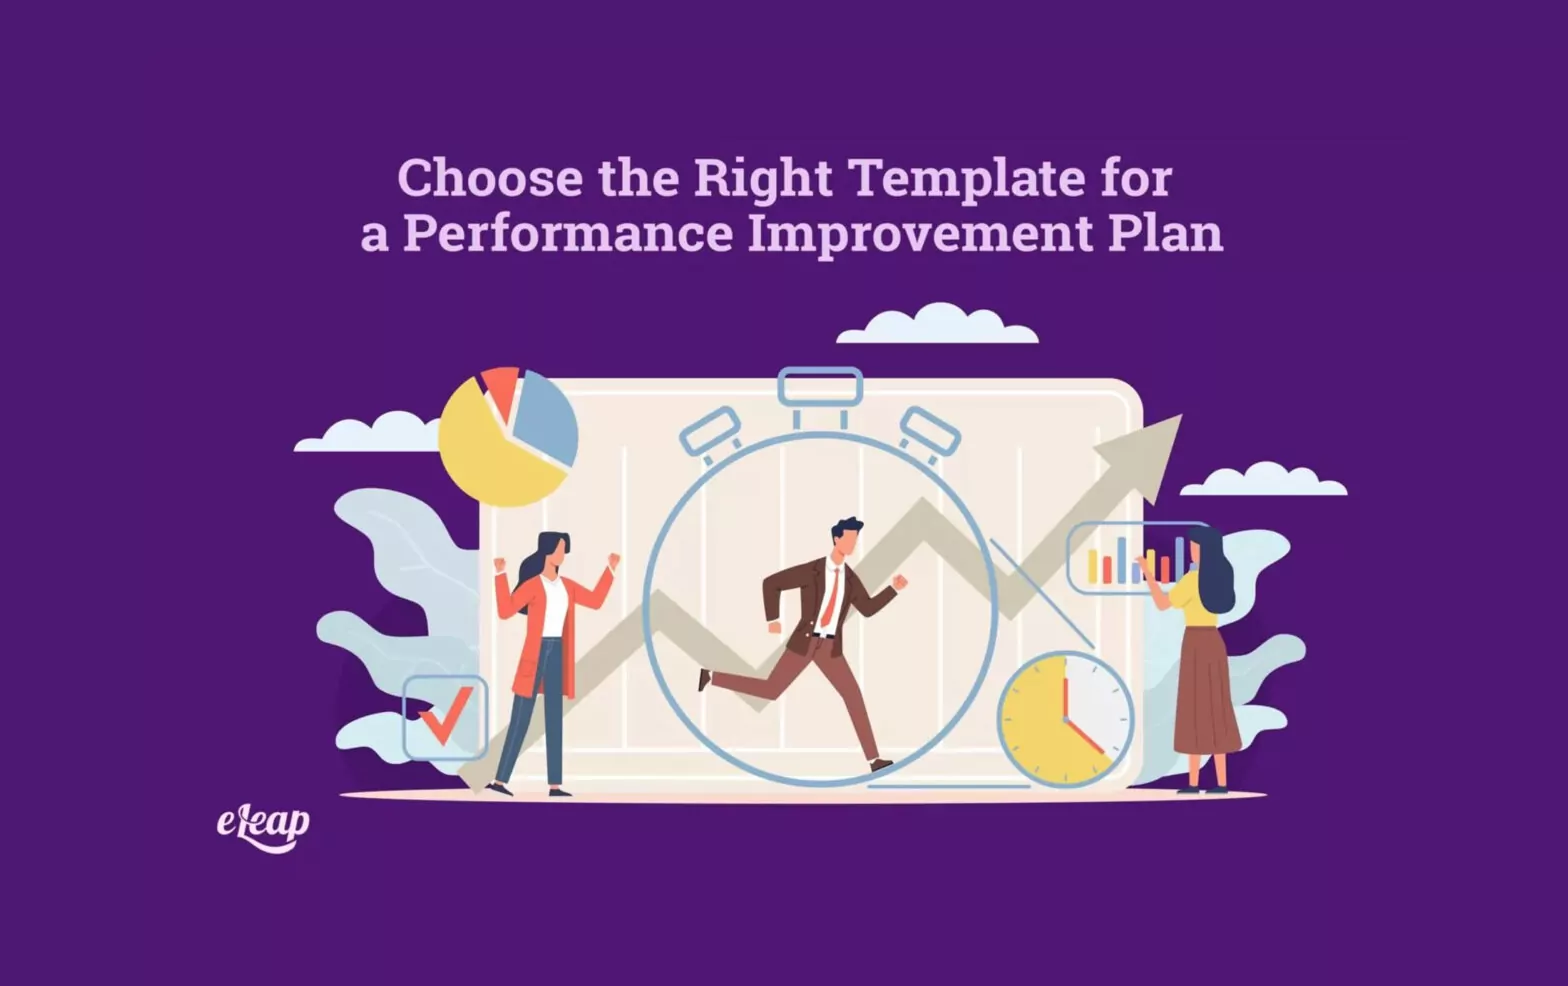 Choose the Right Template for a Performance Improvement Plan